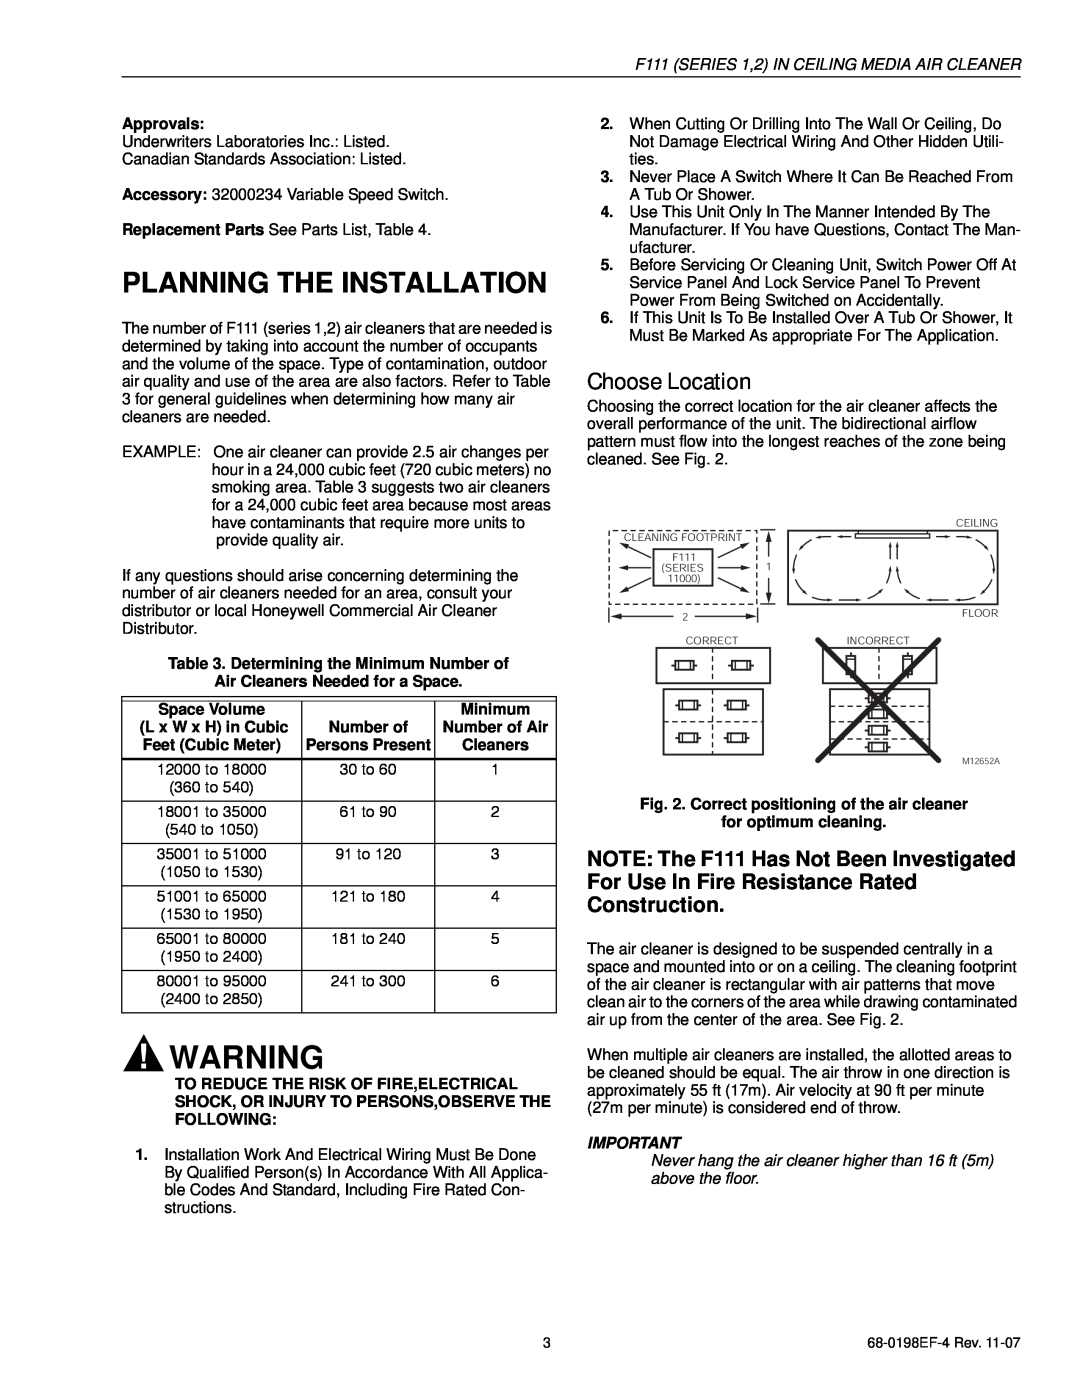 Honeywell F111 Series 1, F111 Series 2 Planning The Installation, Choose Location, NOTE The F111 Has Not Been Investigated 